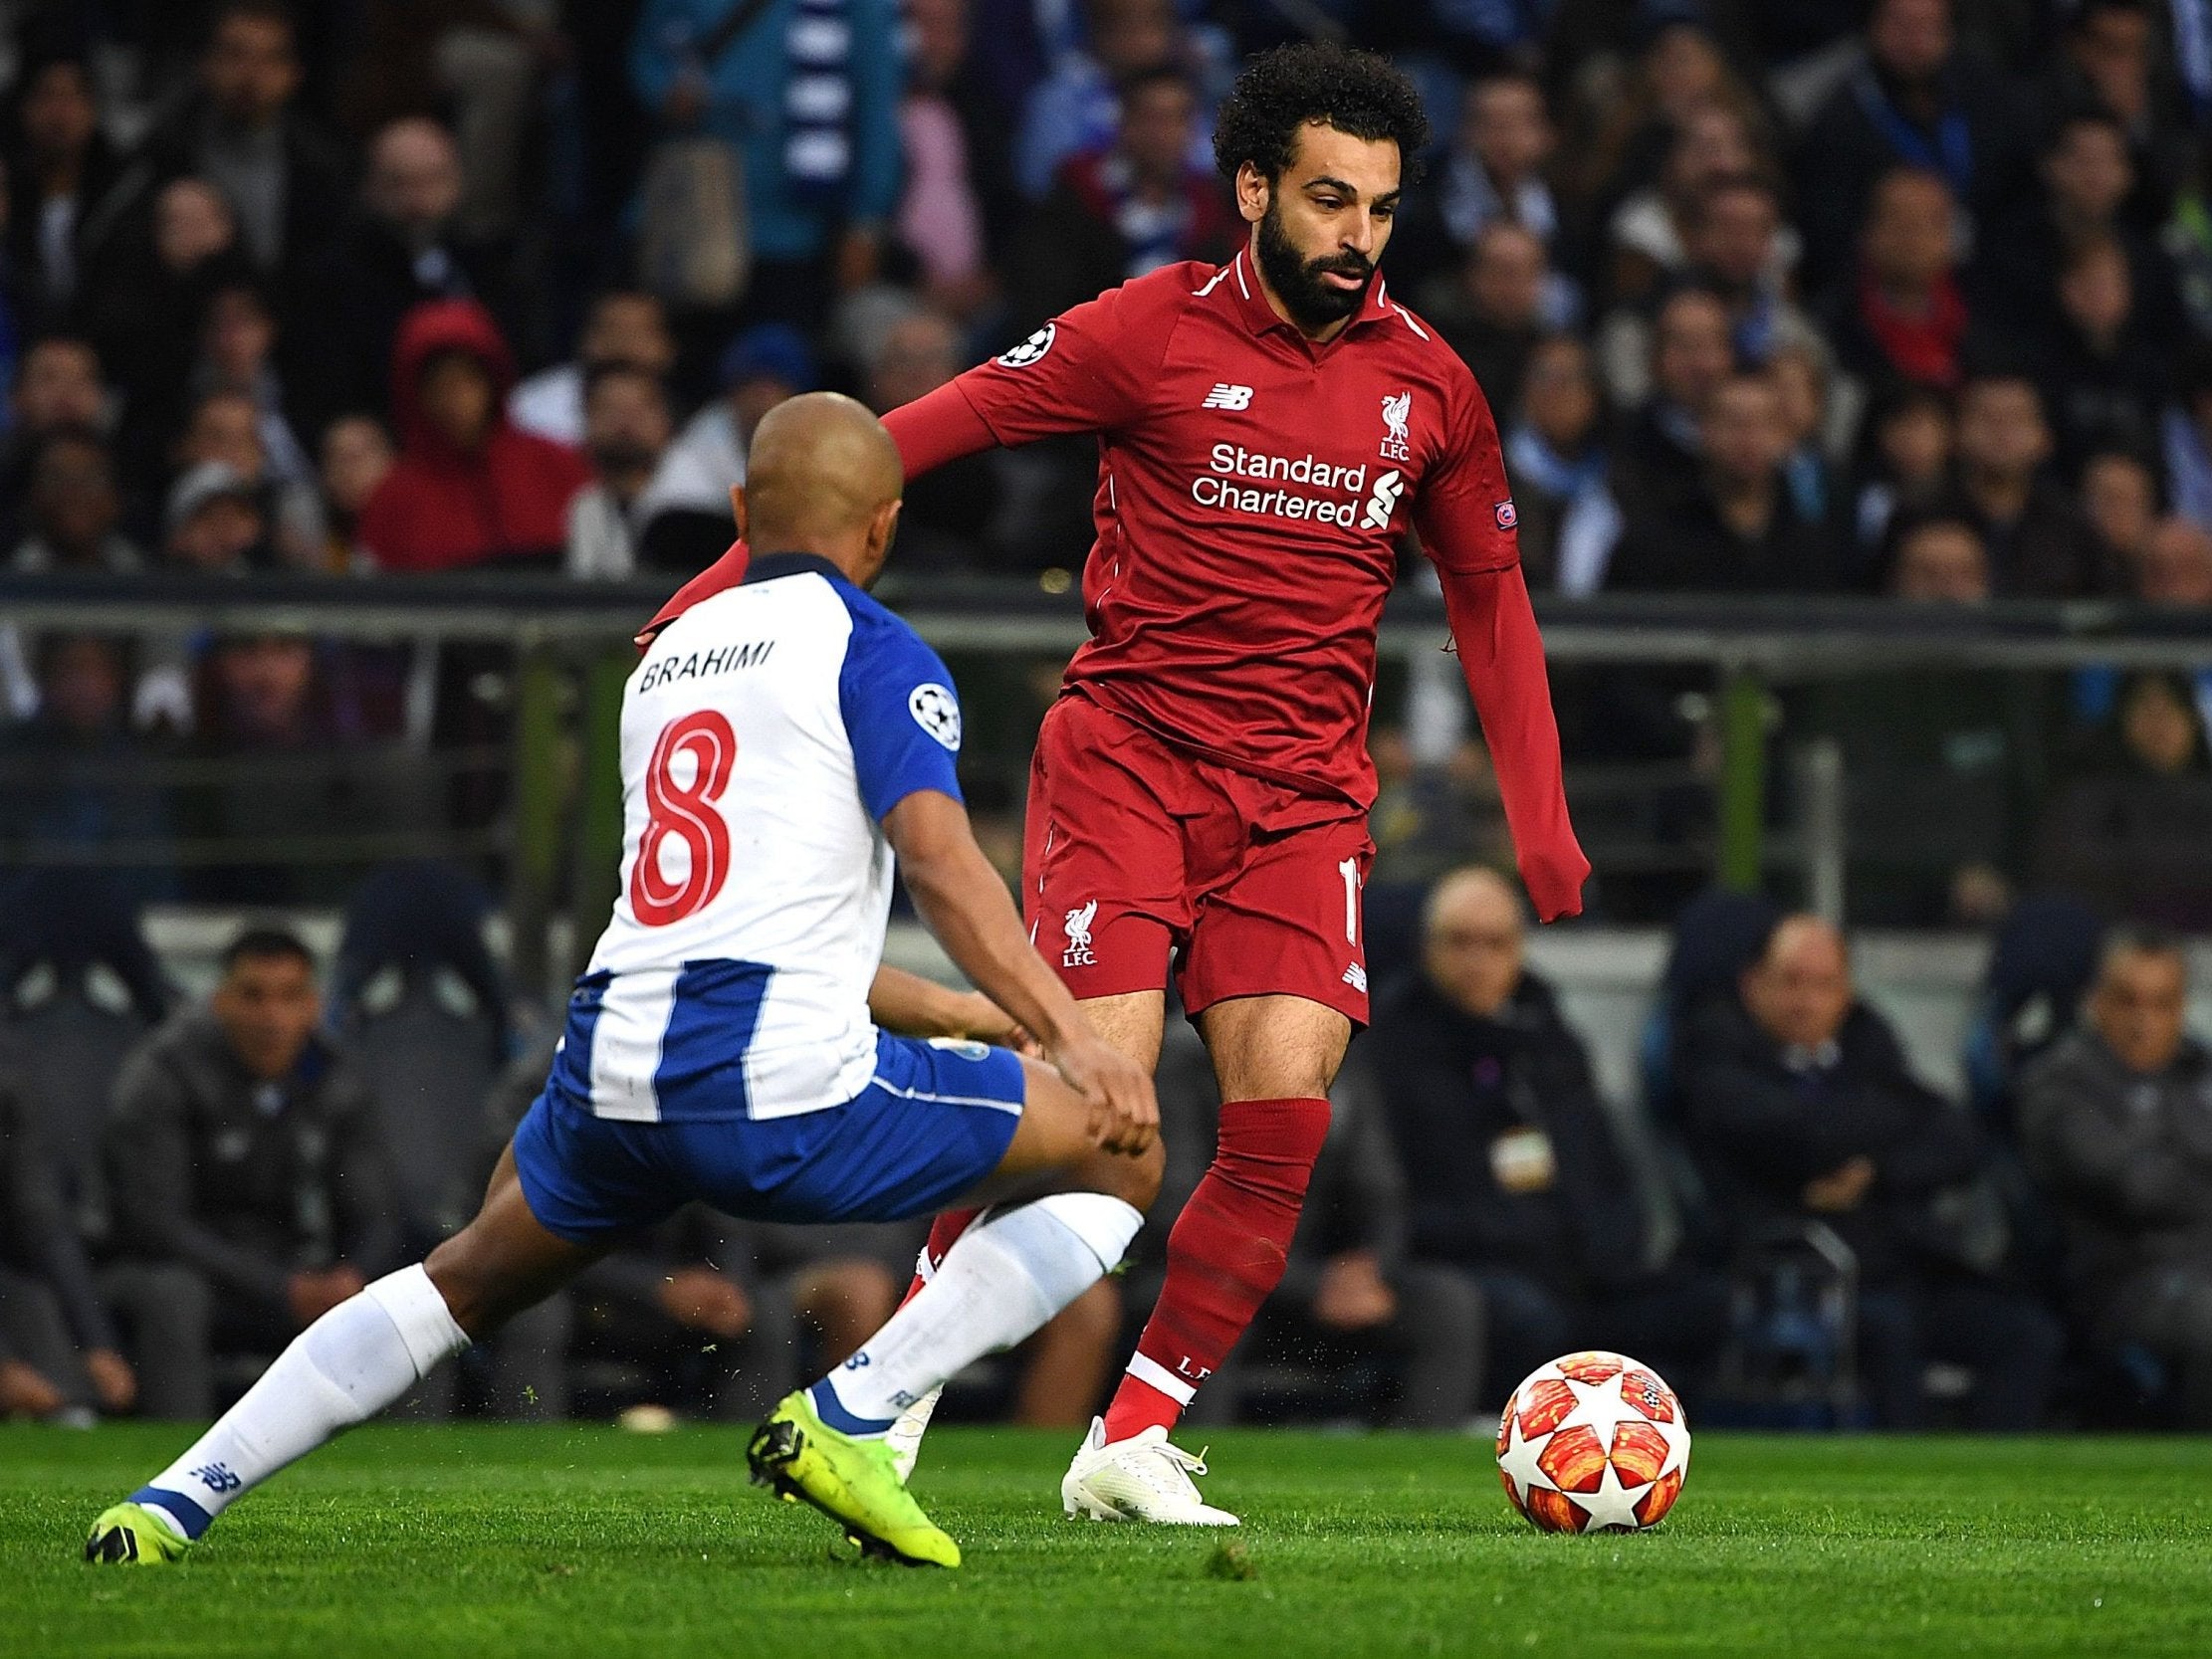 Porto vs Liverpool LIVE: Stream, score, goals, teams and latest updates from the Champions League